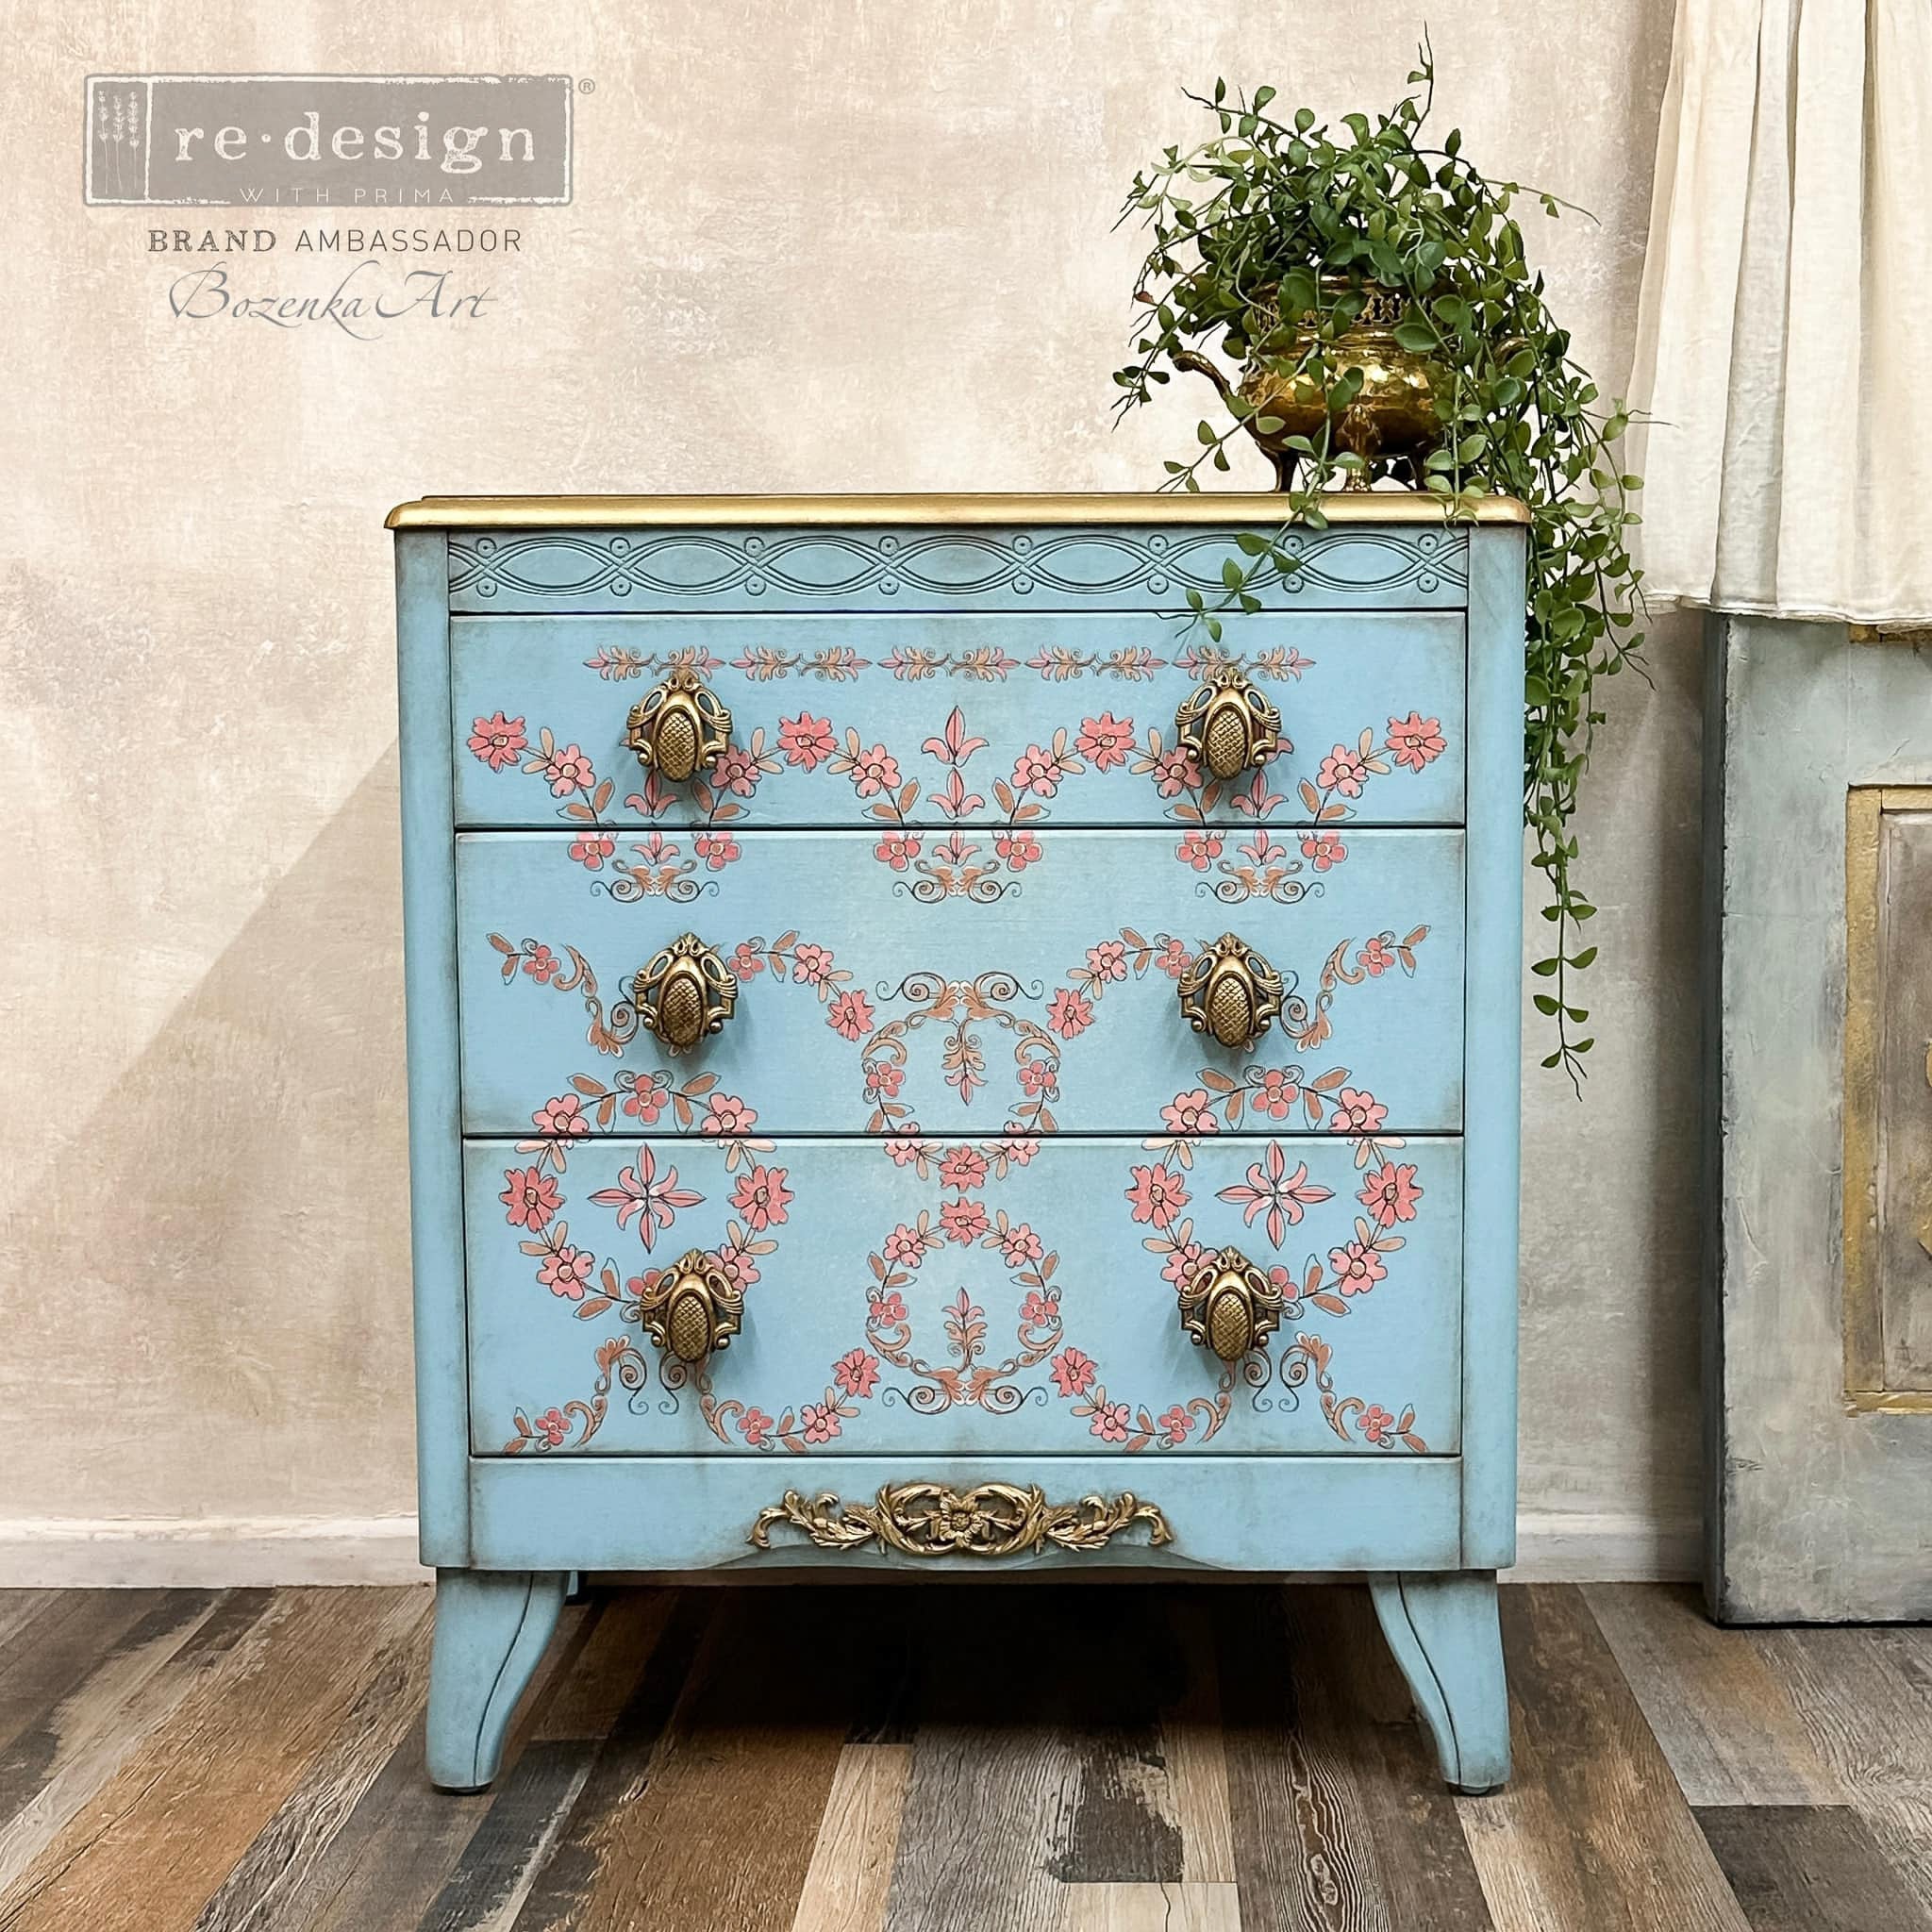 A vintage 3-drawer dresser refurbished by Bozenka Art is painted pale blue and features ReDesign with Prima's Annie Sloan Flower Garland rub-on transfer on its drawers.